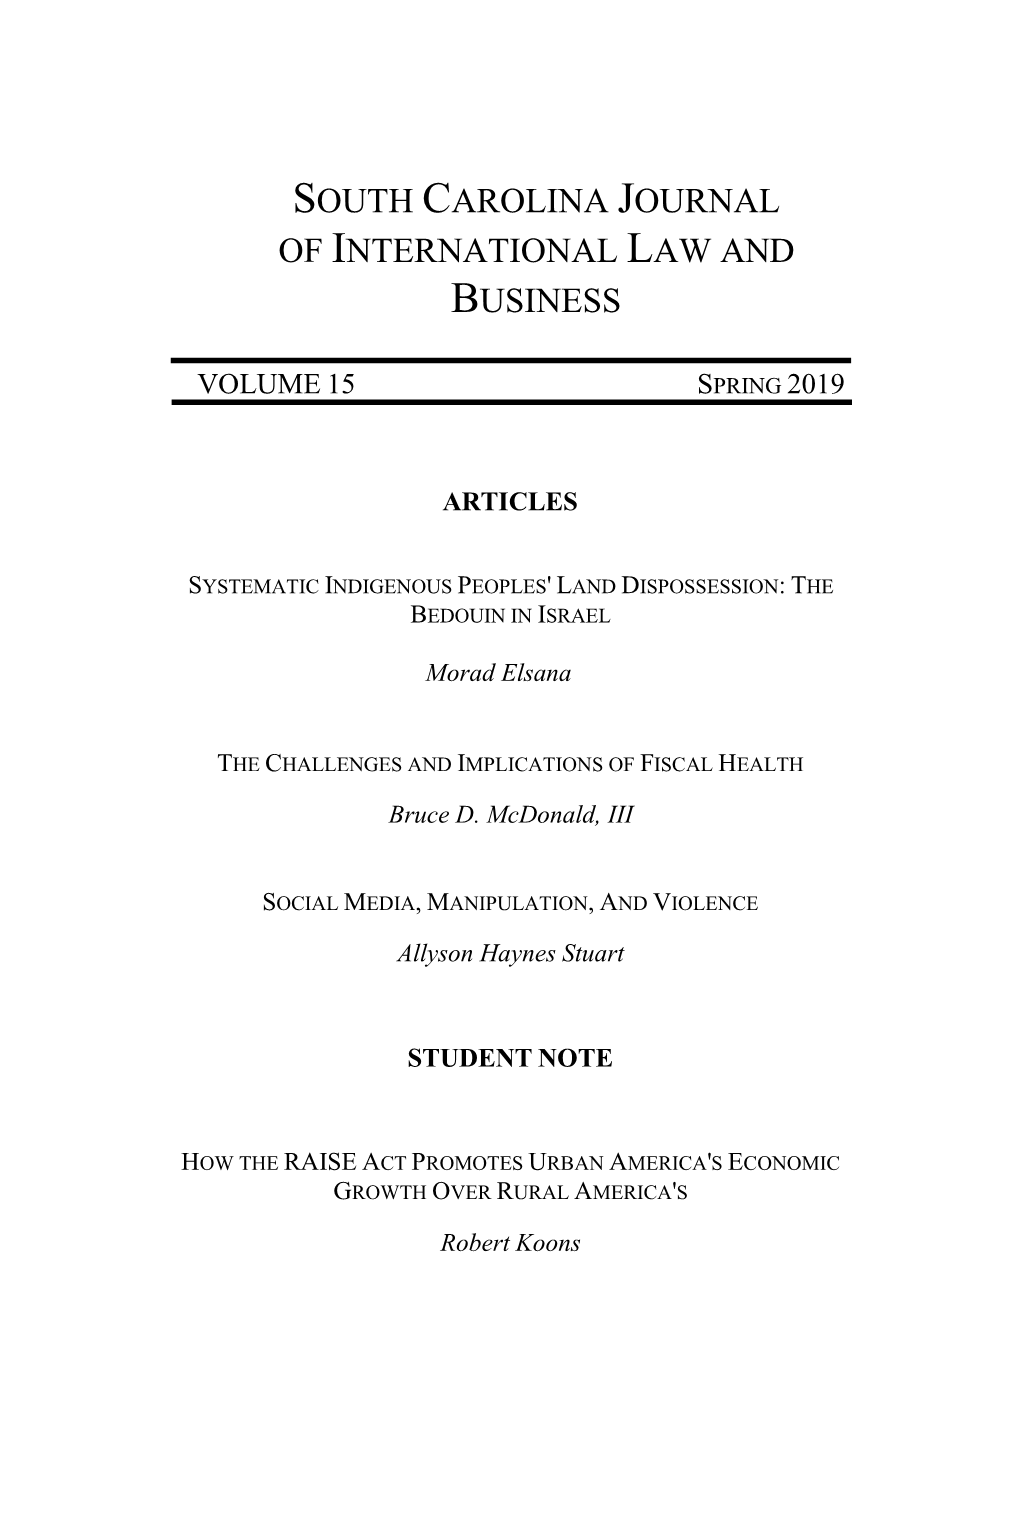 South Carolina Journal of International Law and Business